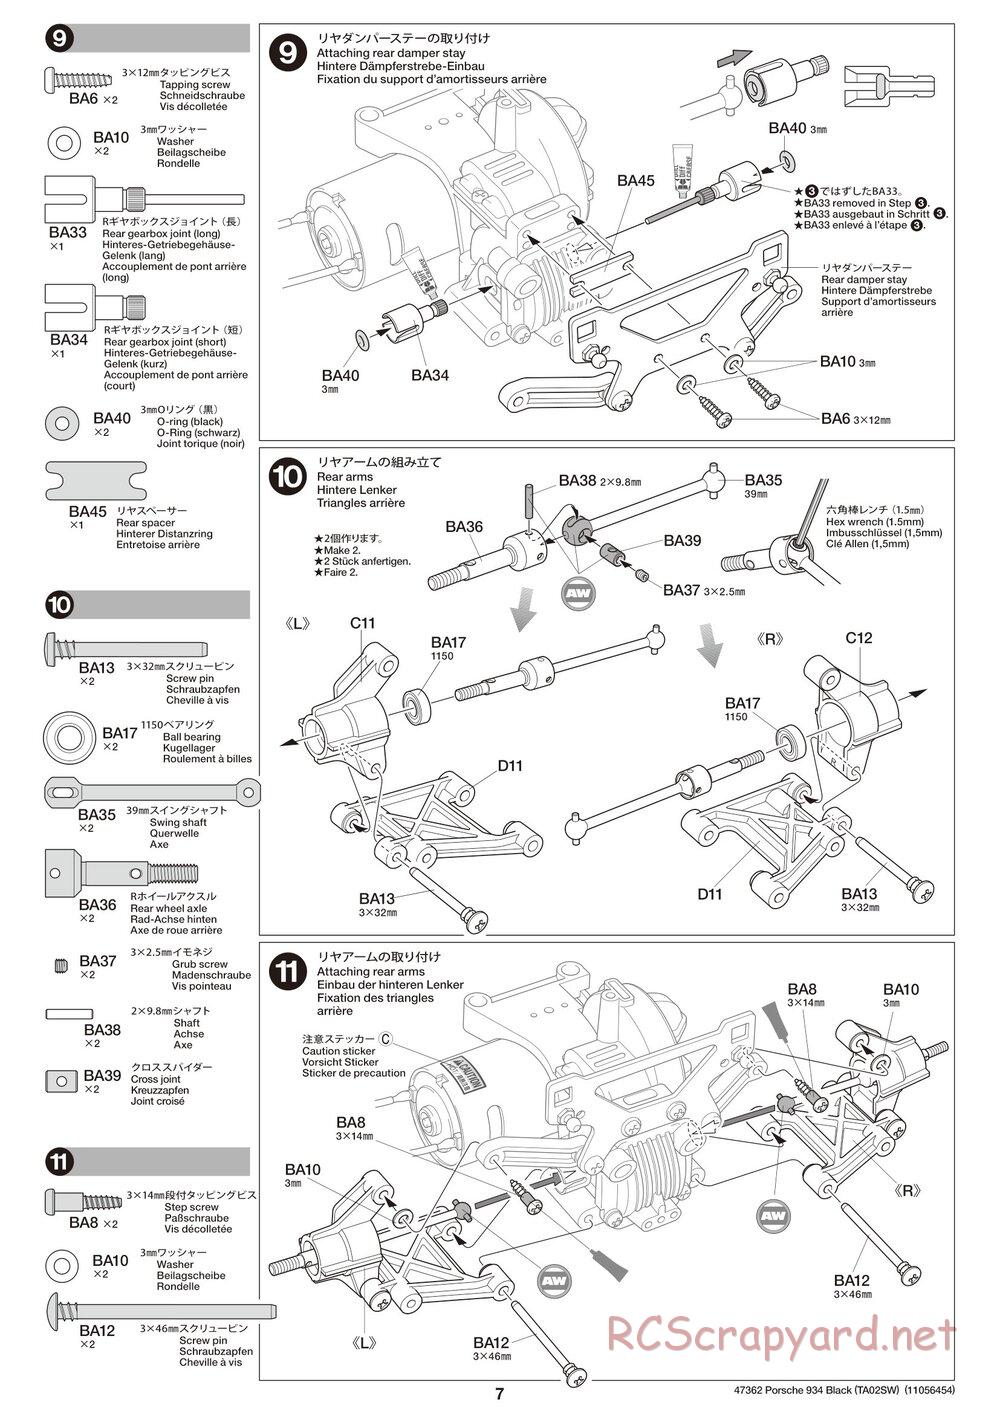 Tamiya - TT-02 White Special Chassis - Manual - Page 7